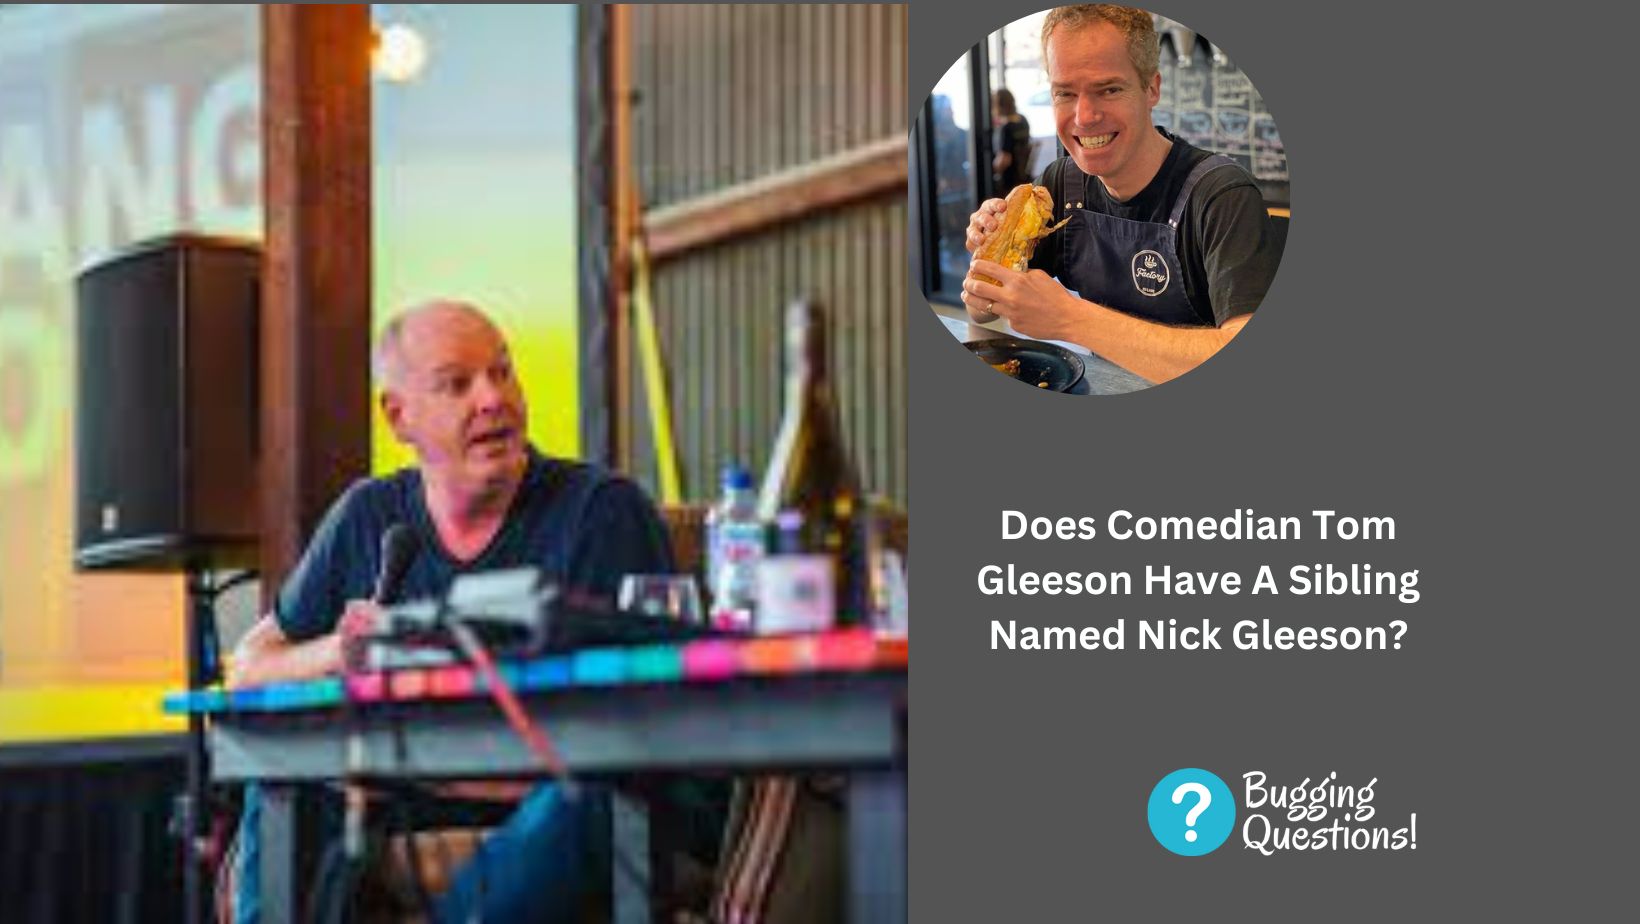 Does Comedian Tom Gleeson Have A Sibling Named Nick Gleeson?